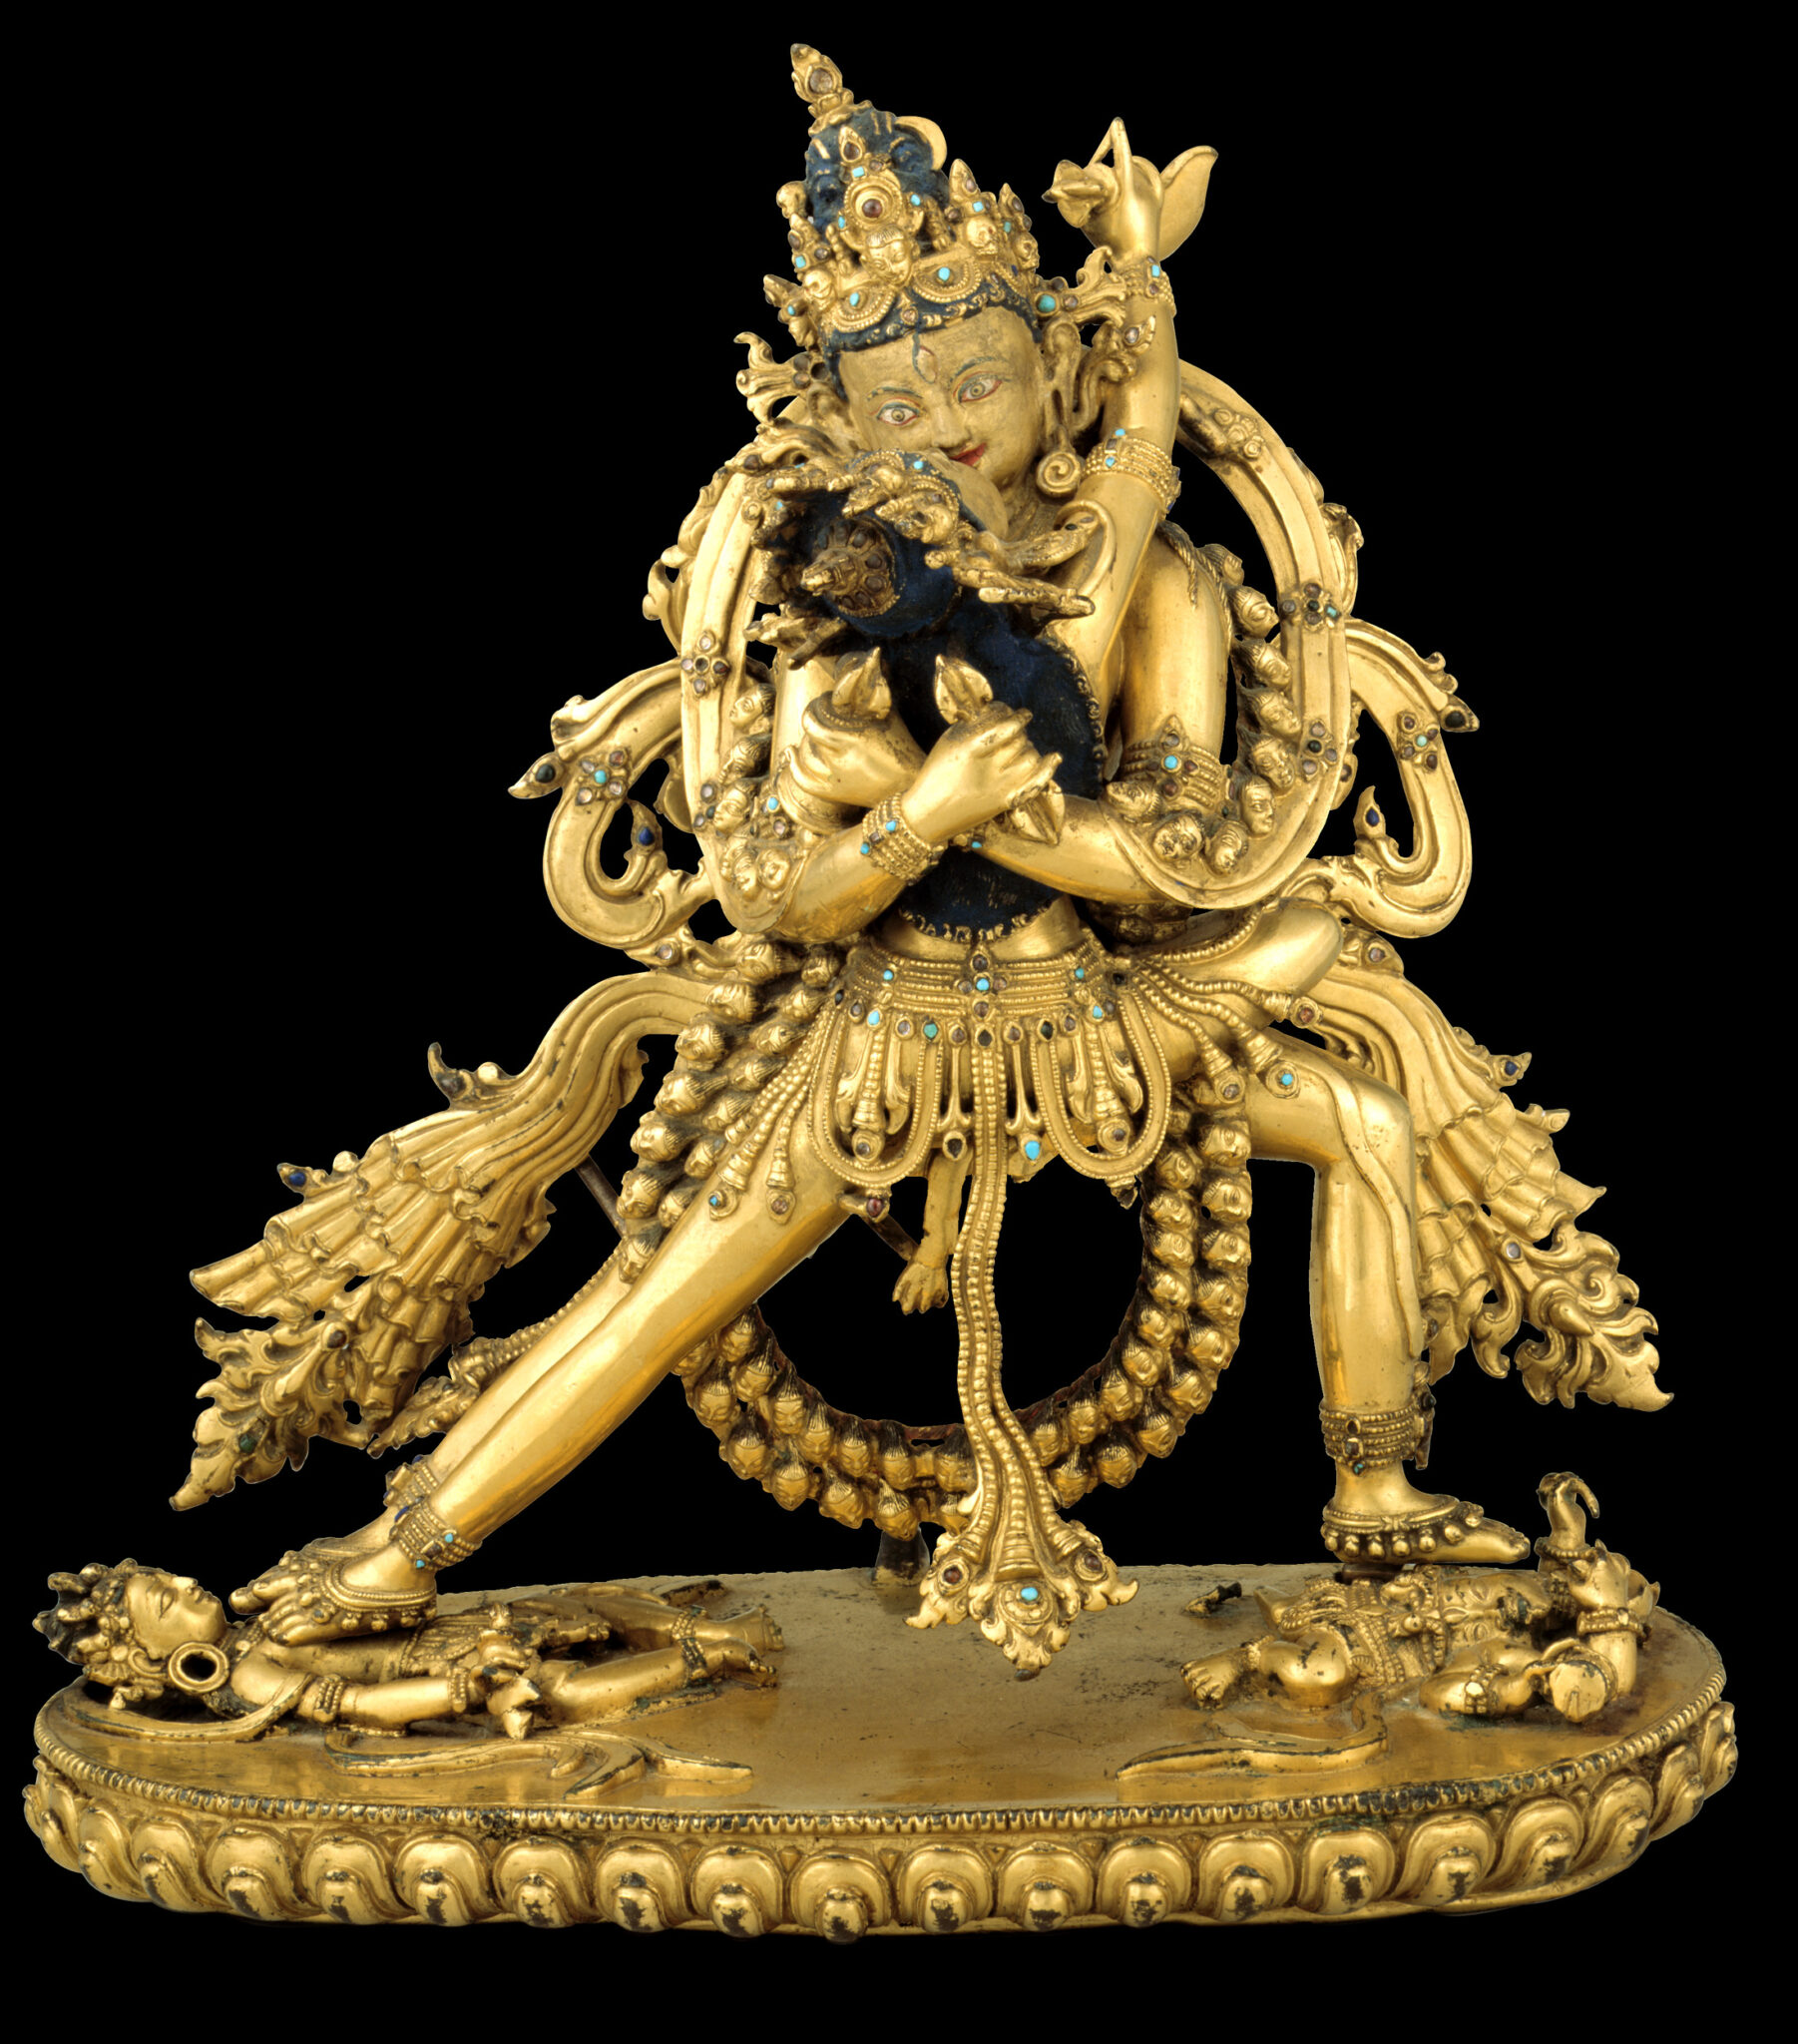 Golden statuette depicting two deities locked in embrace and surrounded by sculptural, billowing sashes